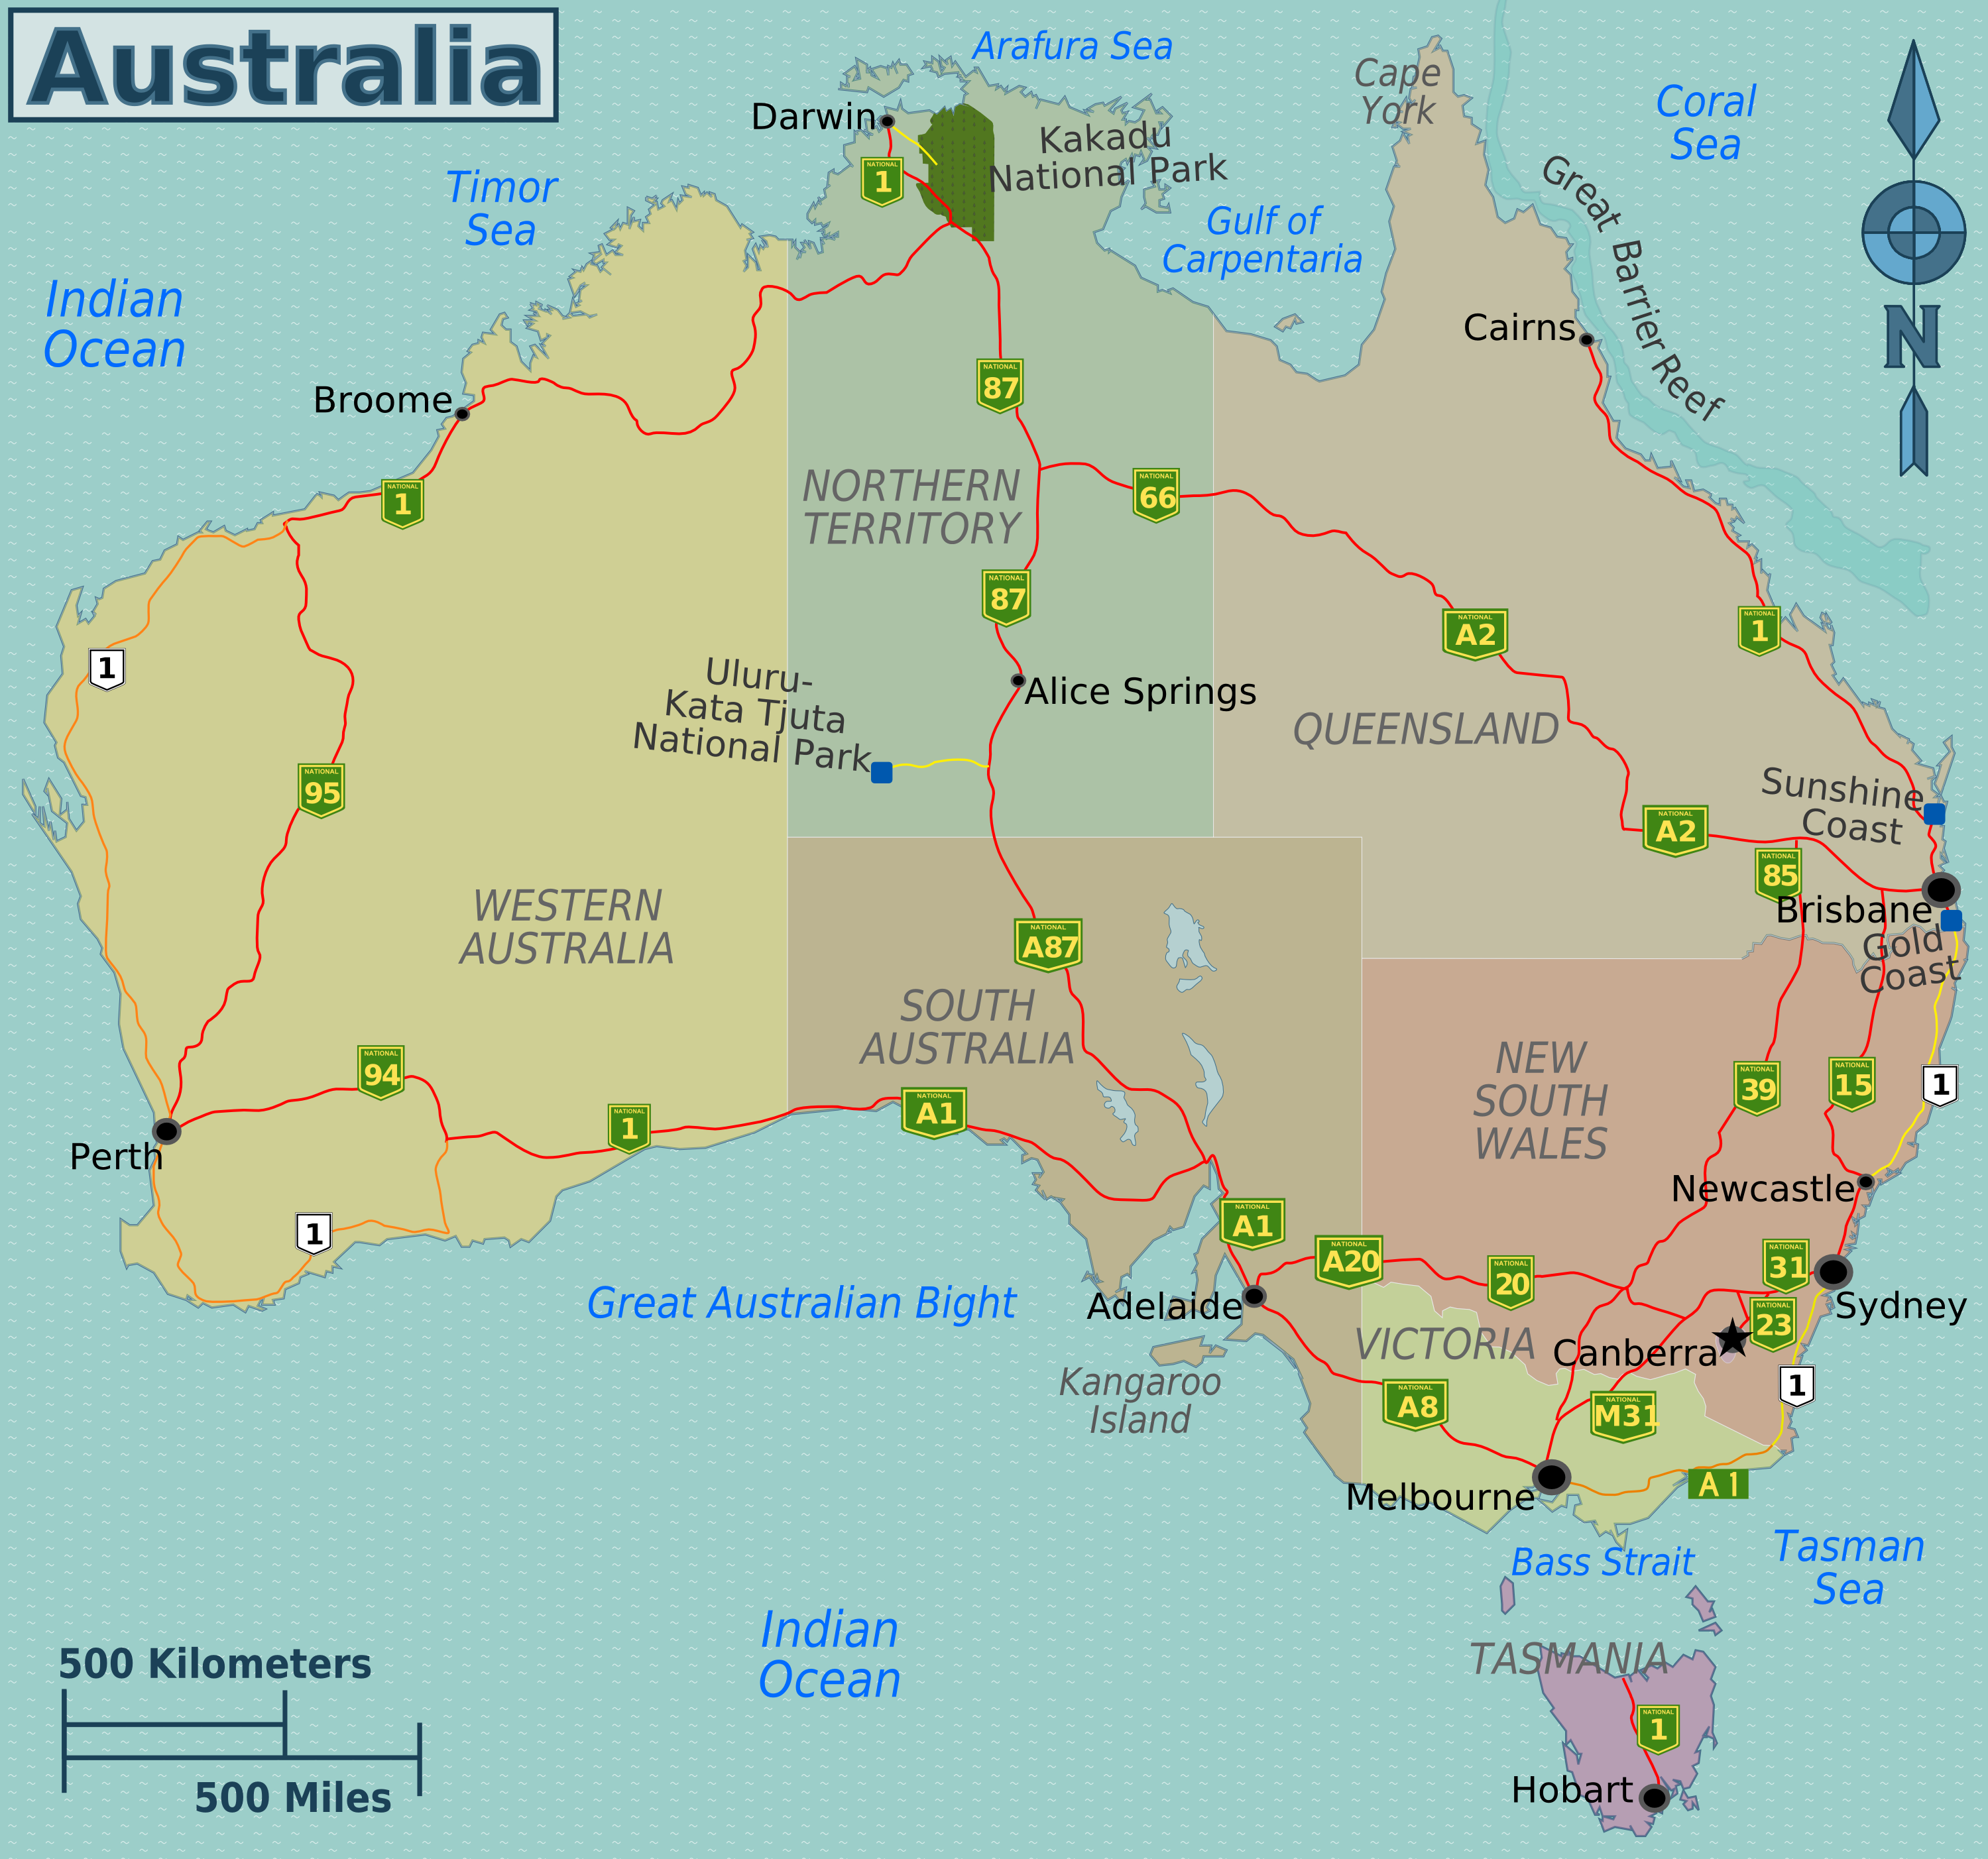 Australia – Travel guide at Wikivoyage